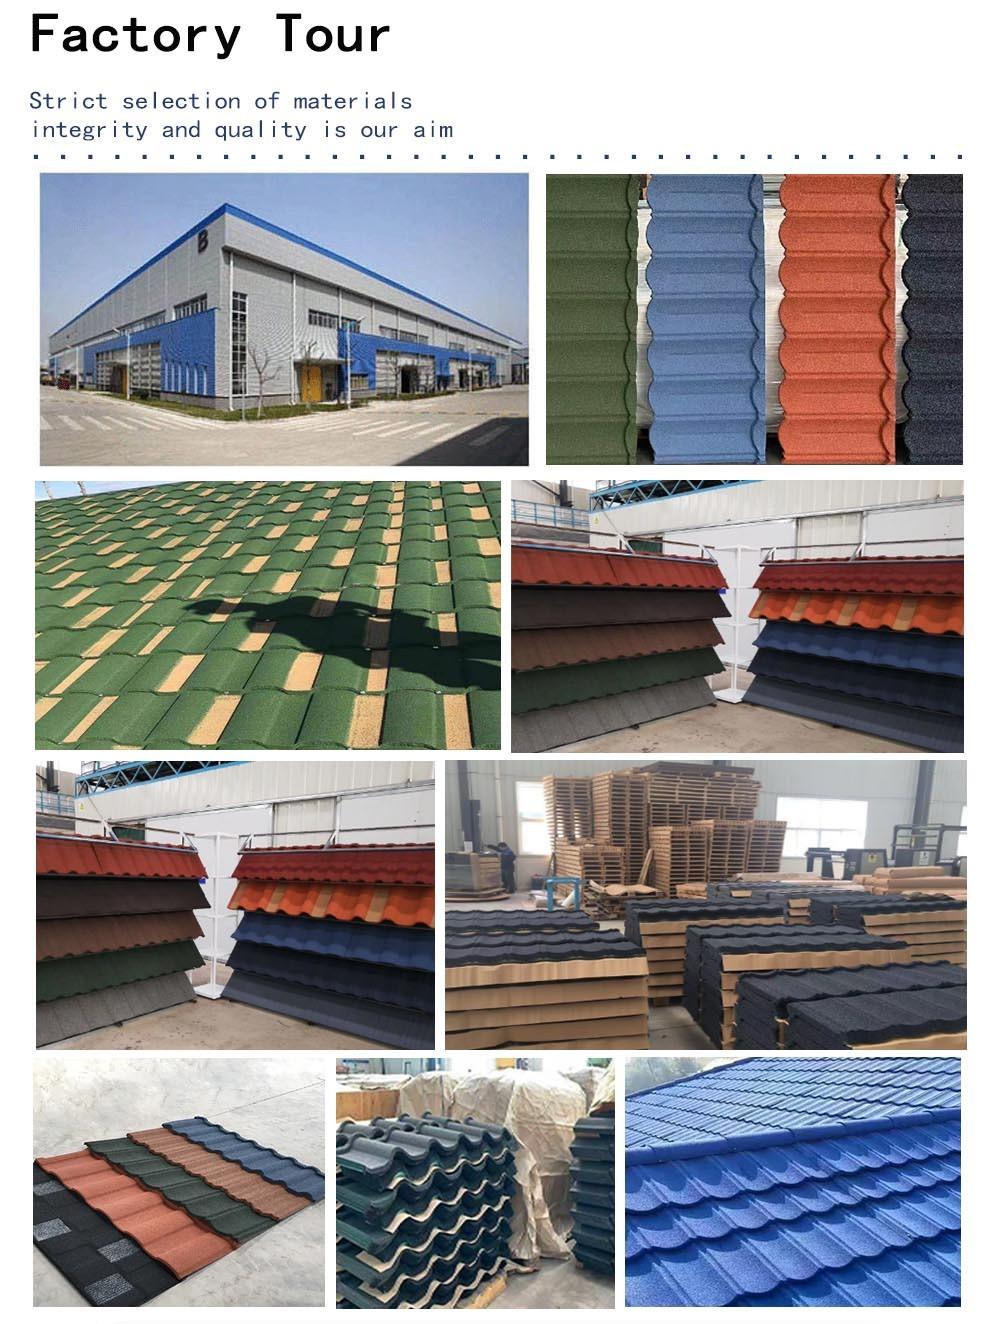 Colorful Aluminized Zinc Steel Roofing Materials Sheet Bond Tile Stone Coated Metal Roof Tile Roofing Panel